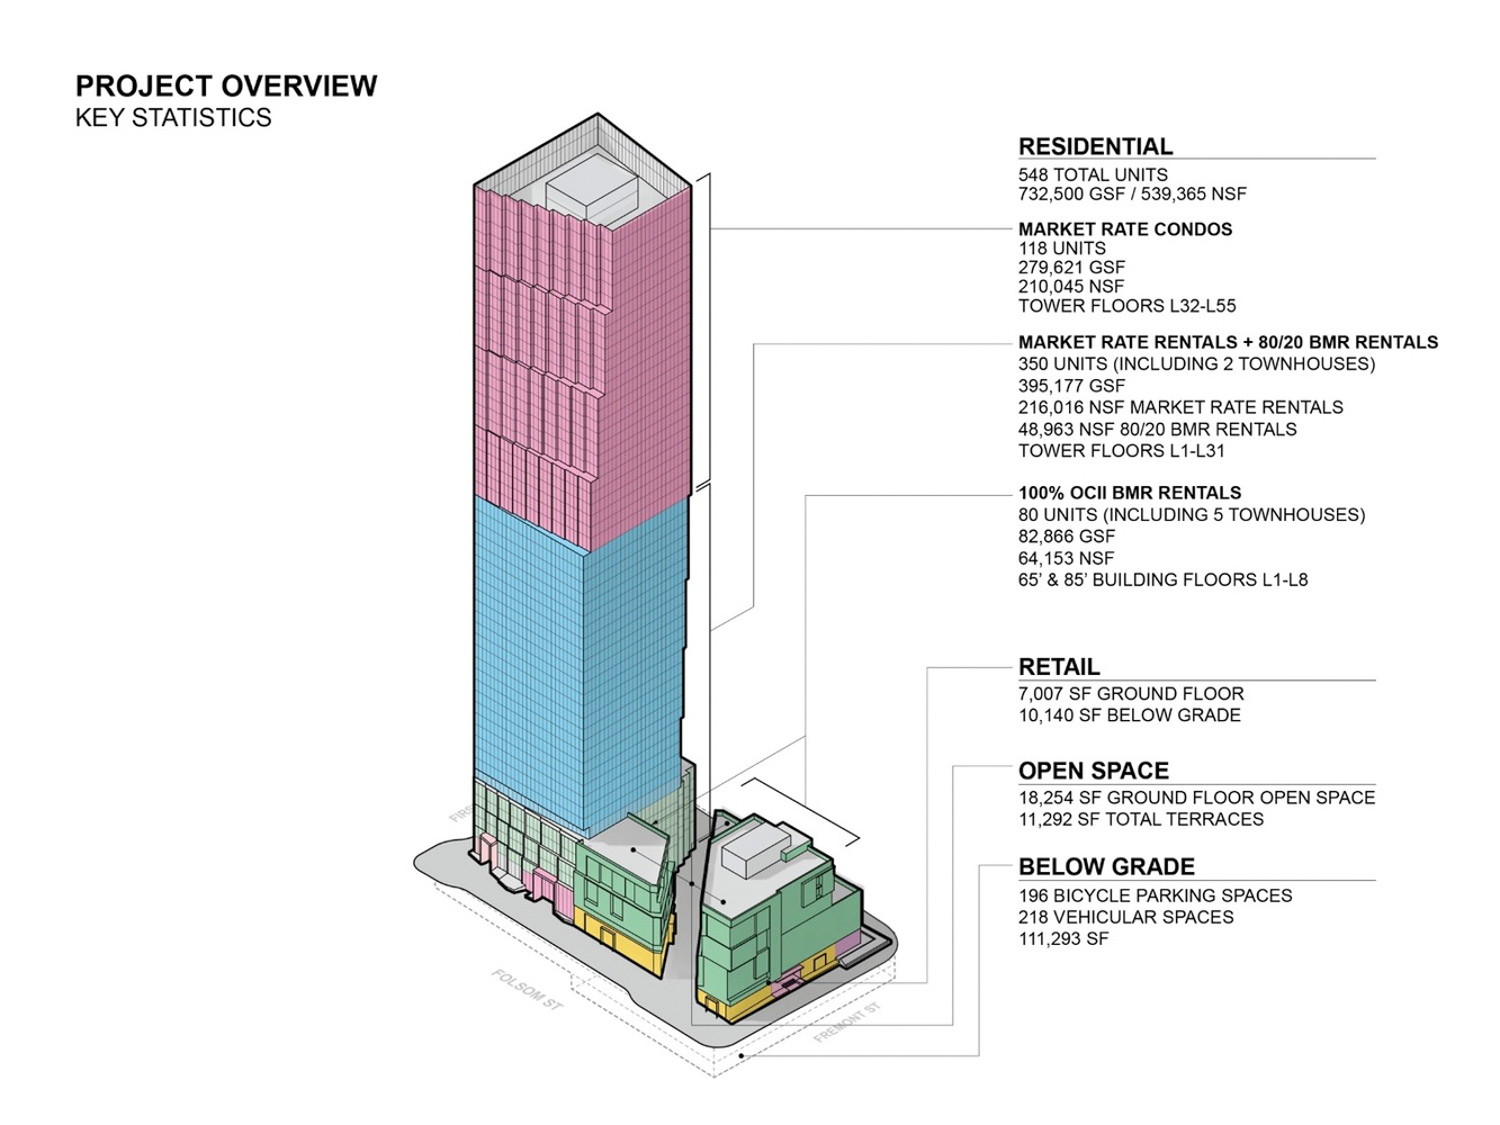 The Avery vertical elevation, image by OMA